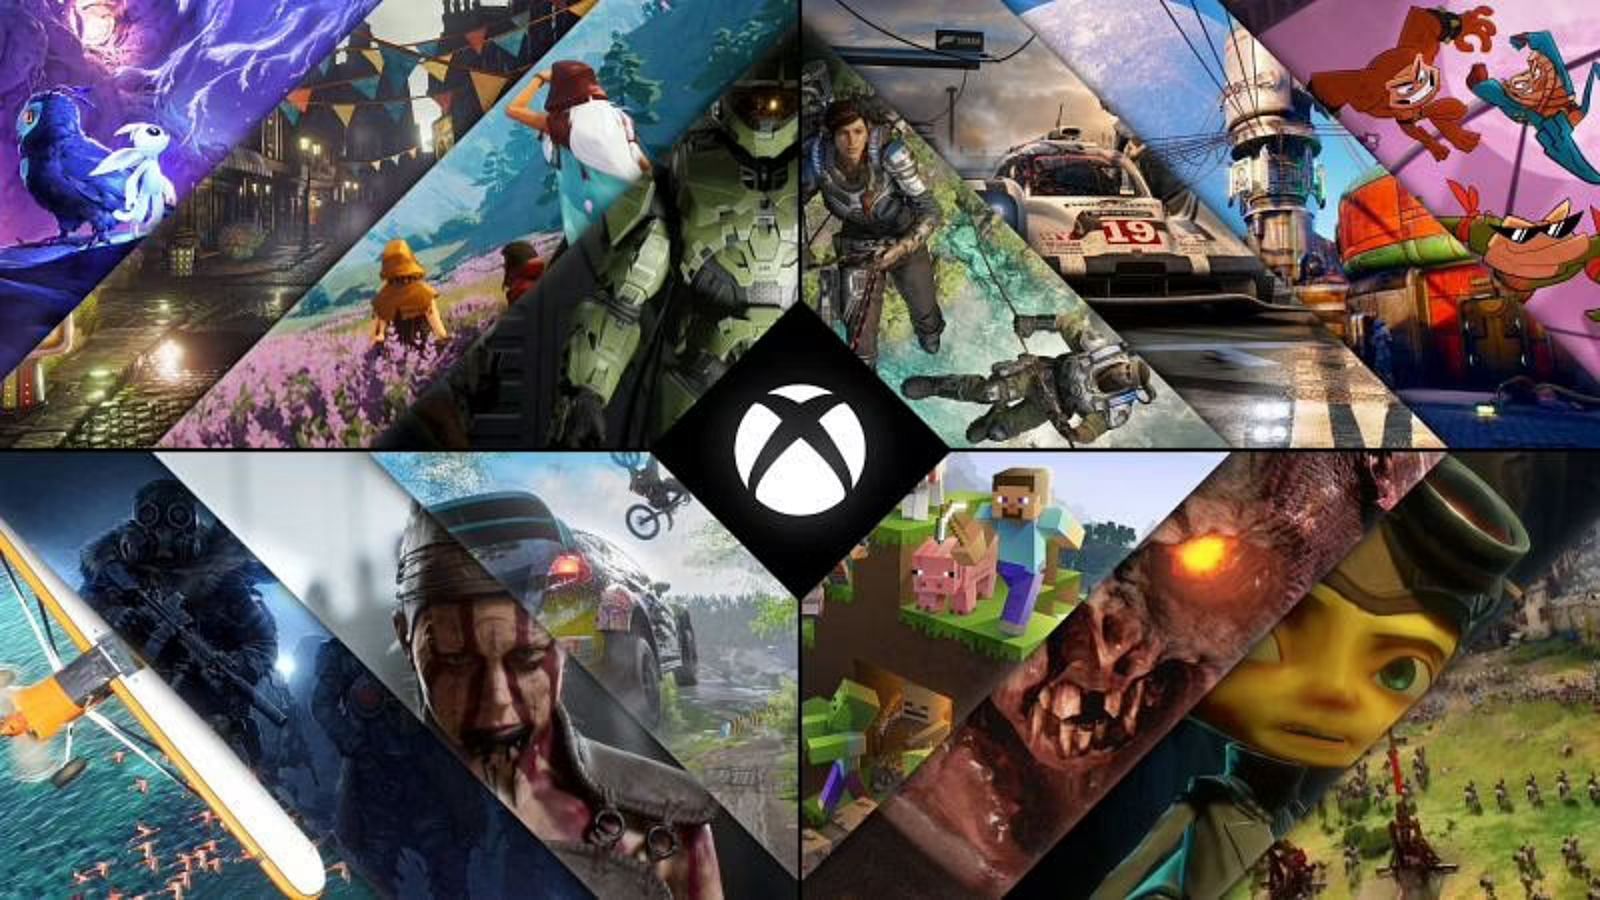 Microsoft reportedly has over 50 games in development (Image by Microsoft)